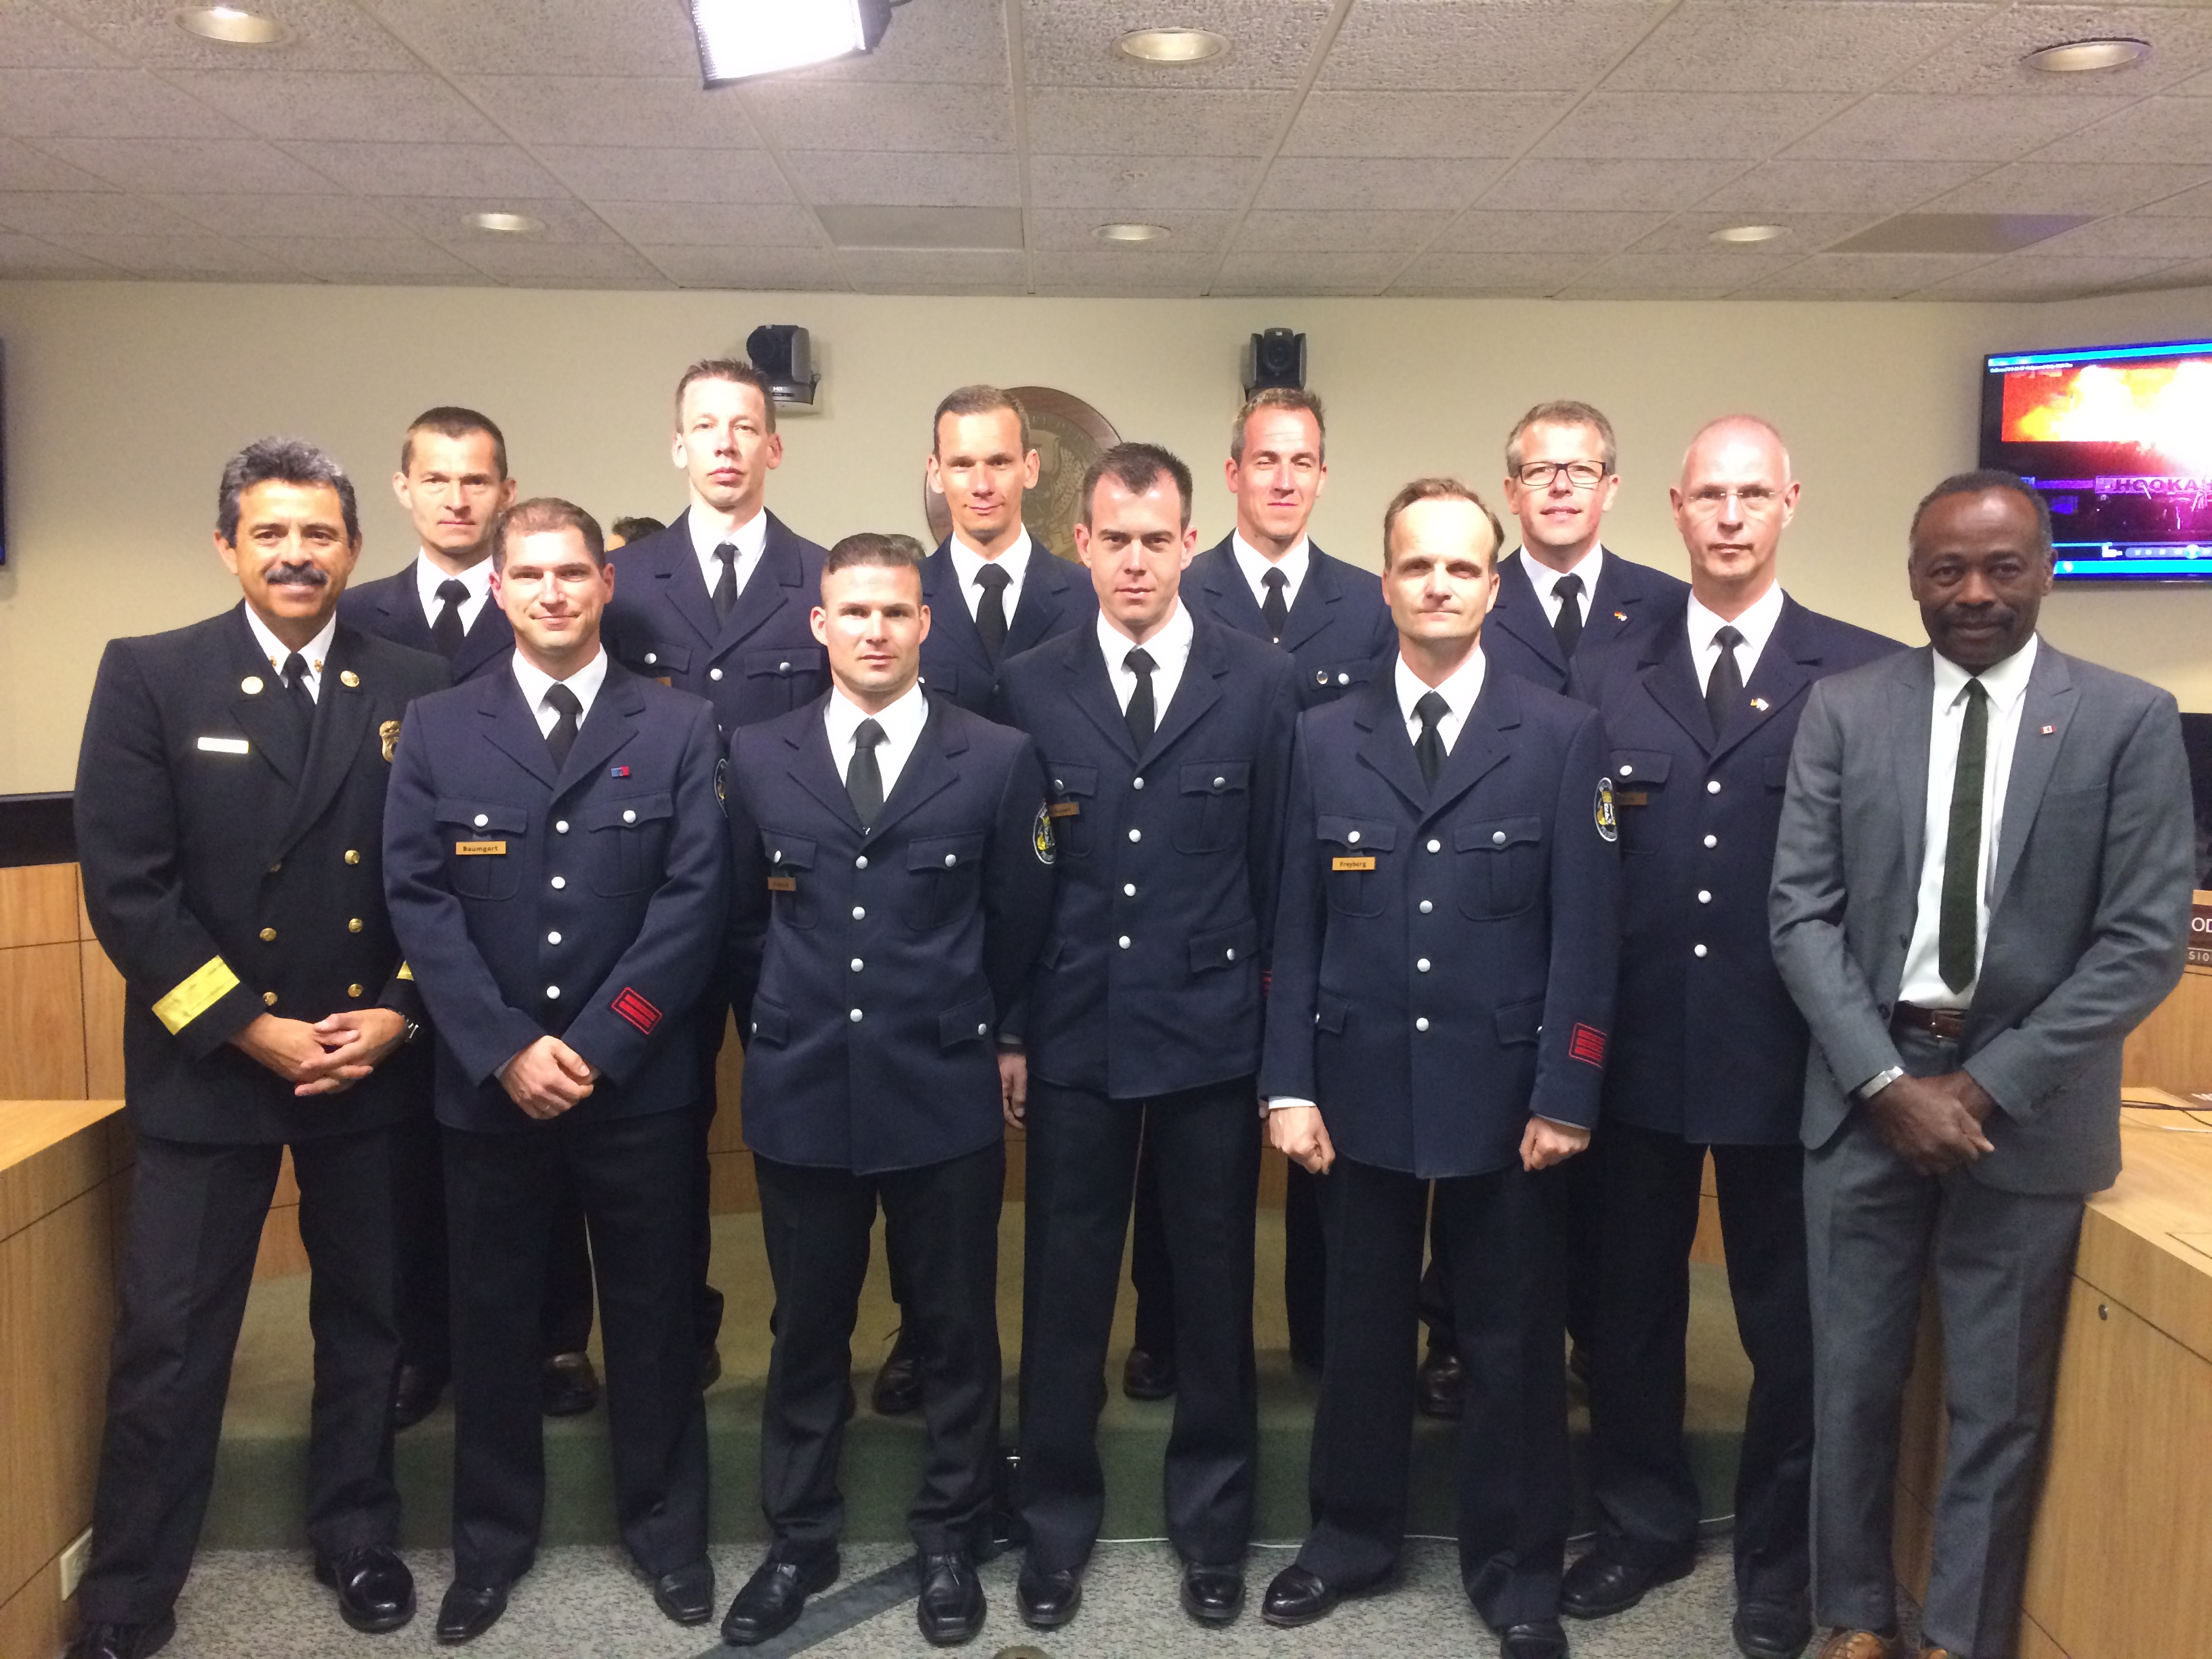 Tom LaBonge and Berlin Firefighters Honored at LAFD Board of Fire Commissioners